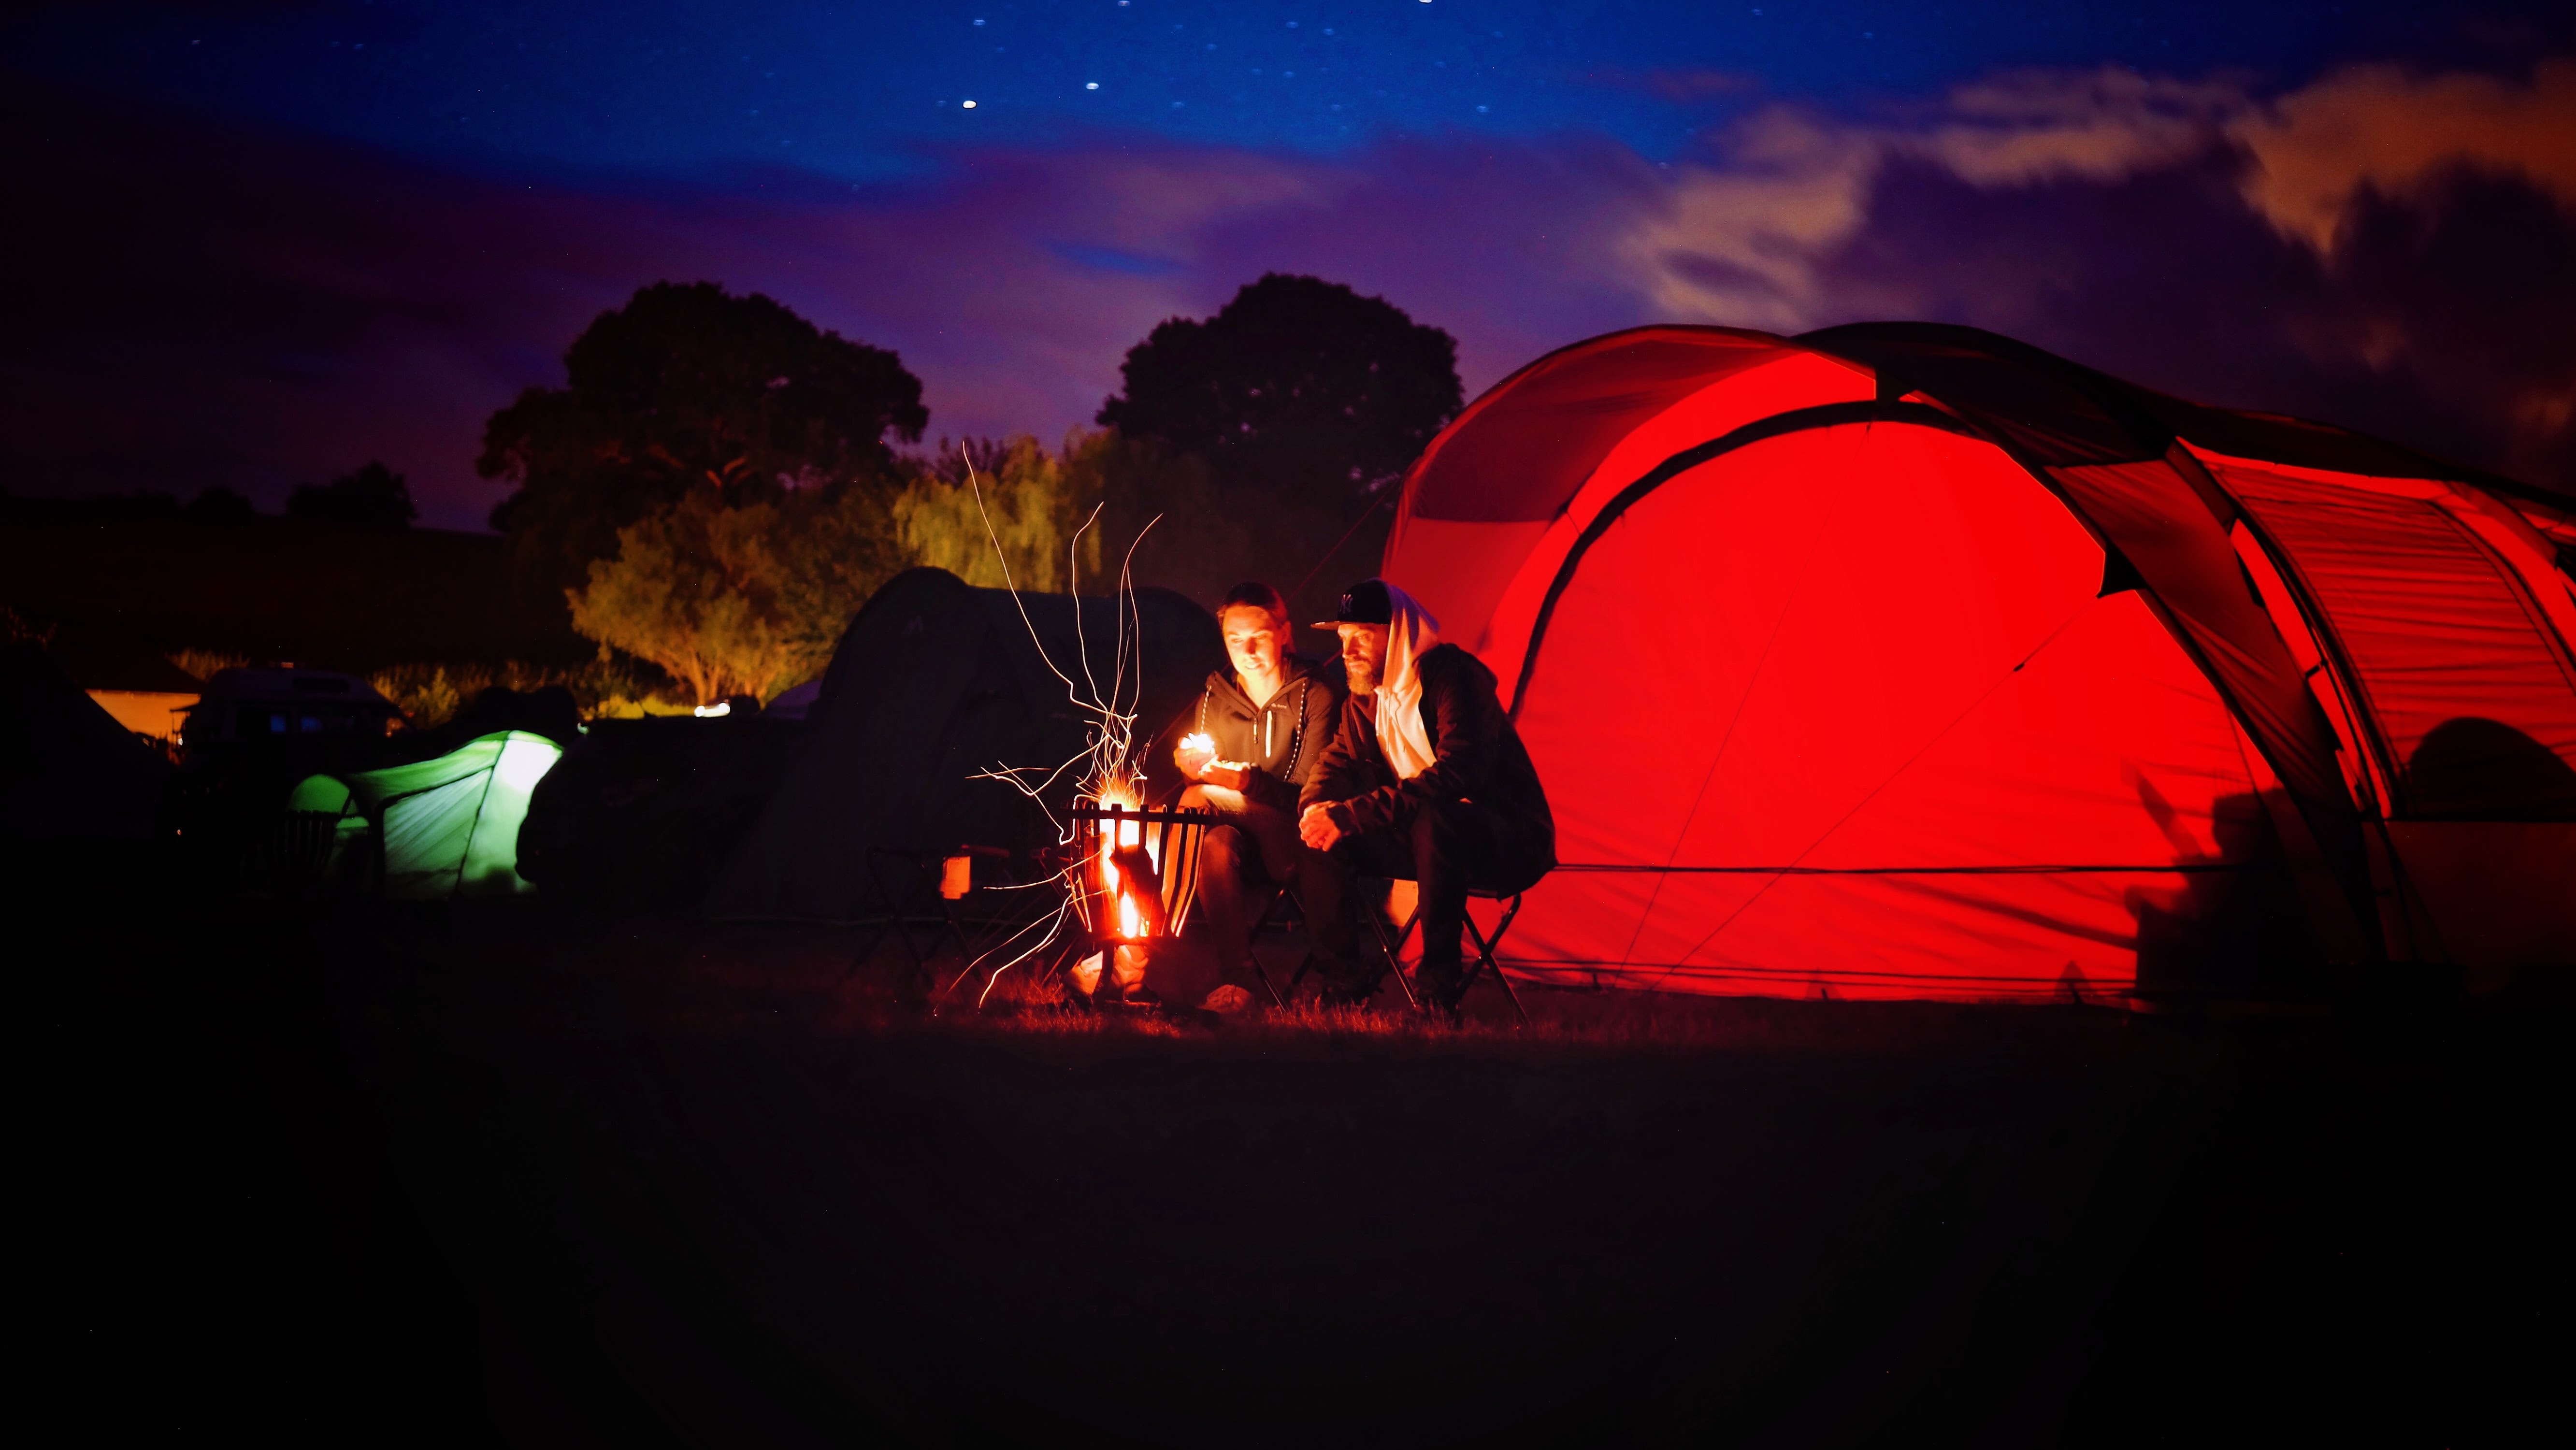 Man and woman sitting beside bonfire during nigh time photo